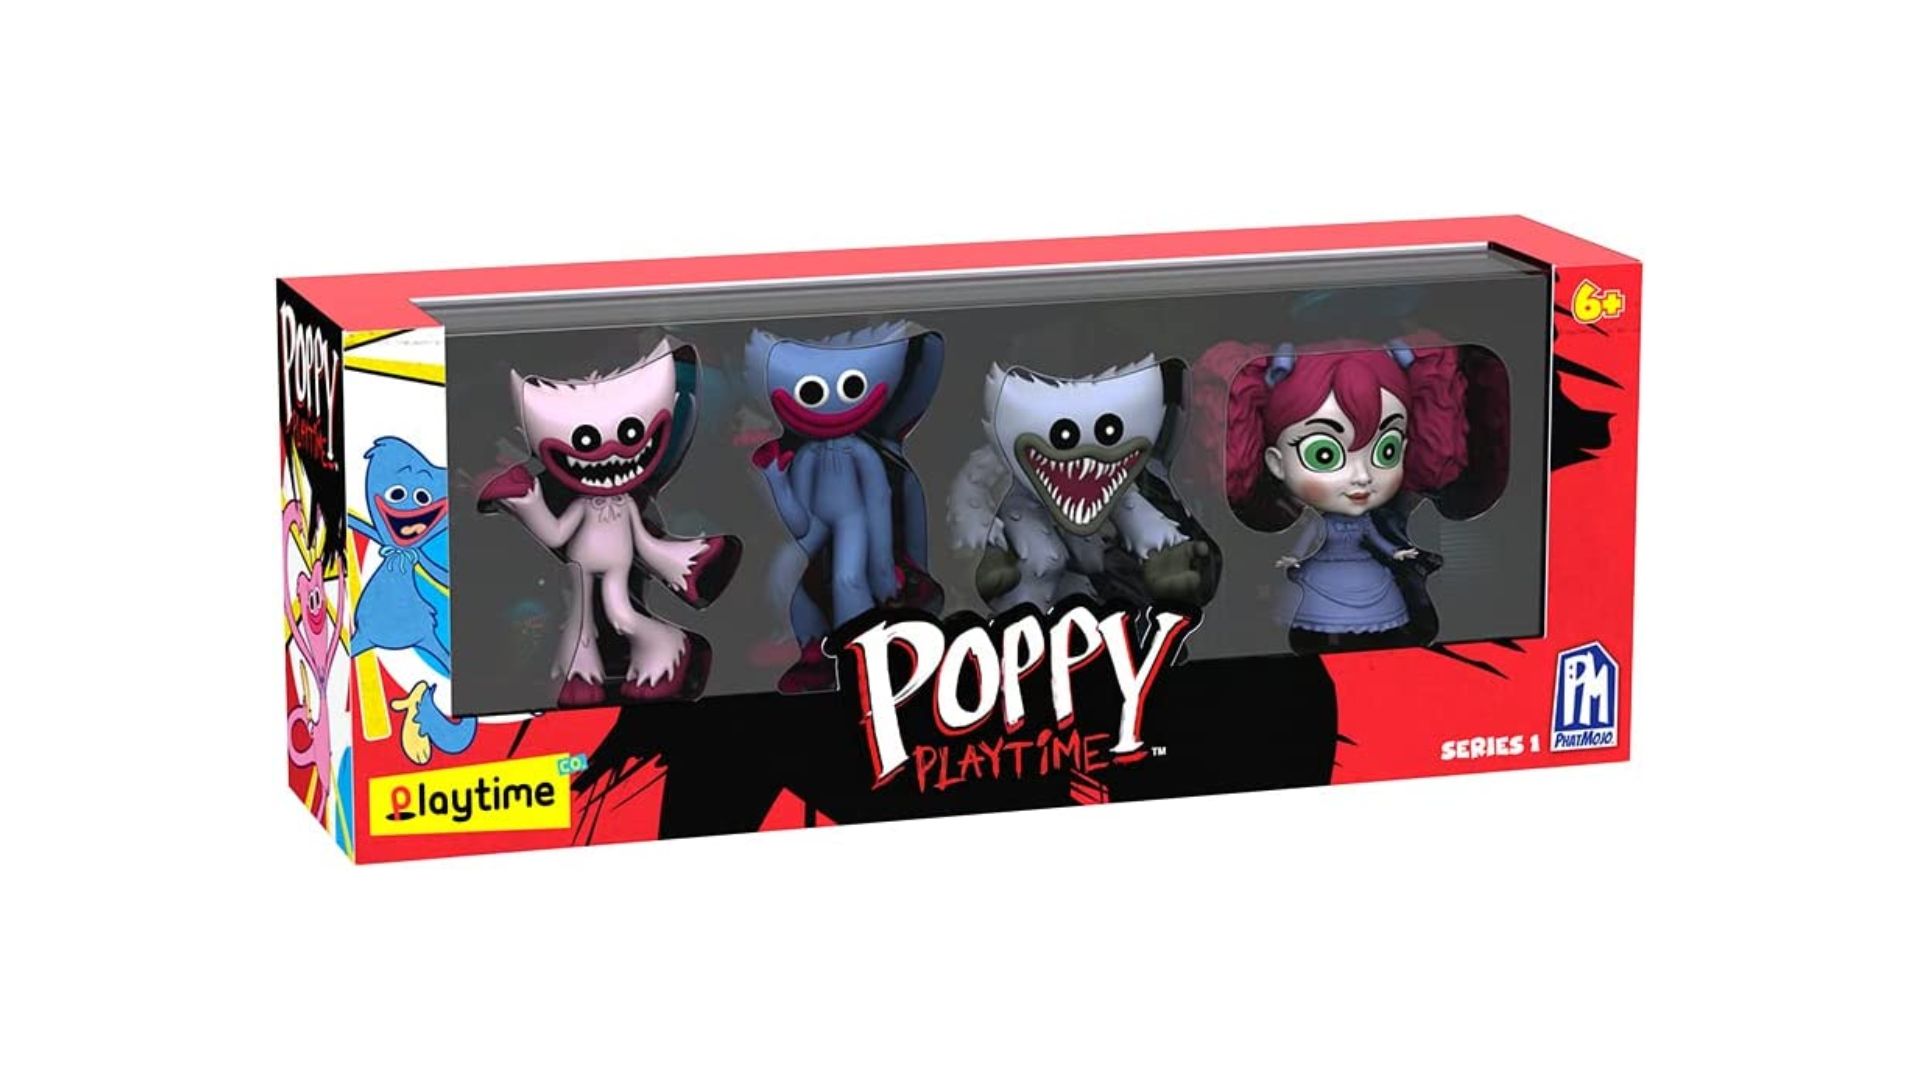 Poppy Playtime Huggy Wuggy & Friends PJ Pug-a-Piller Exclusive